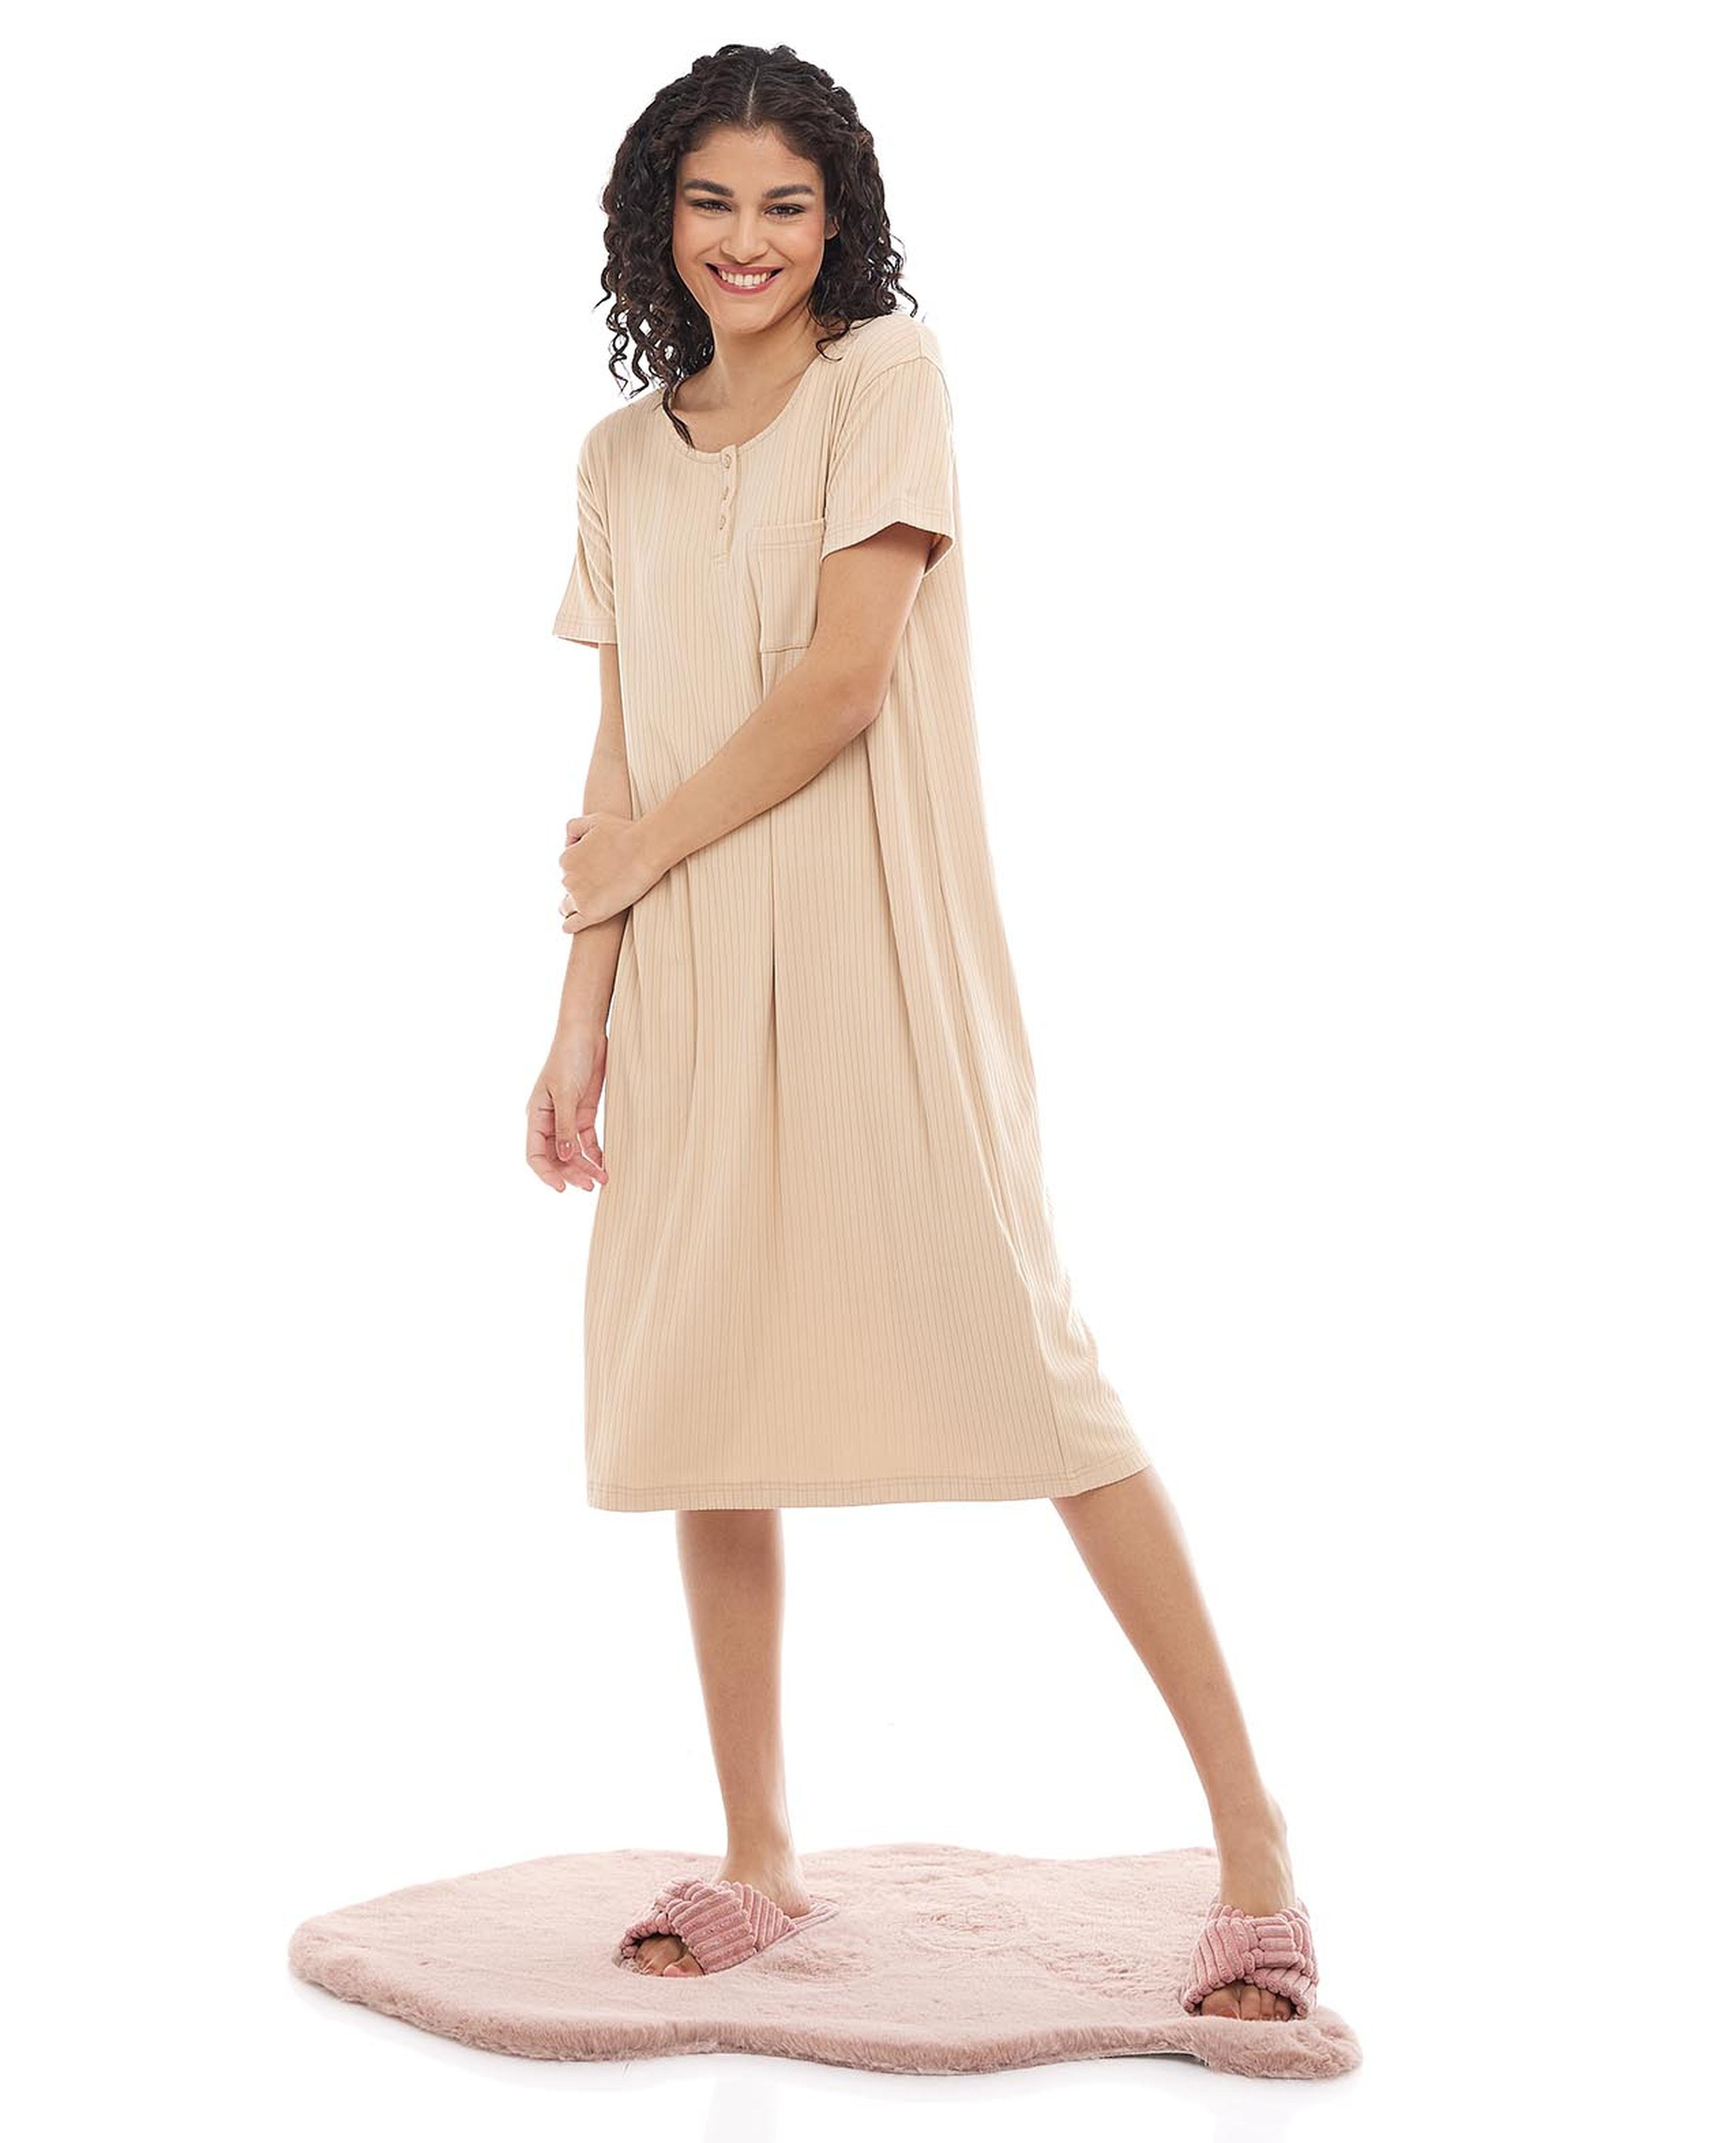 Ribbed Nightdress with Crew Neck and Short Sleeves